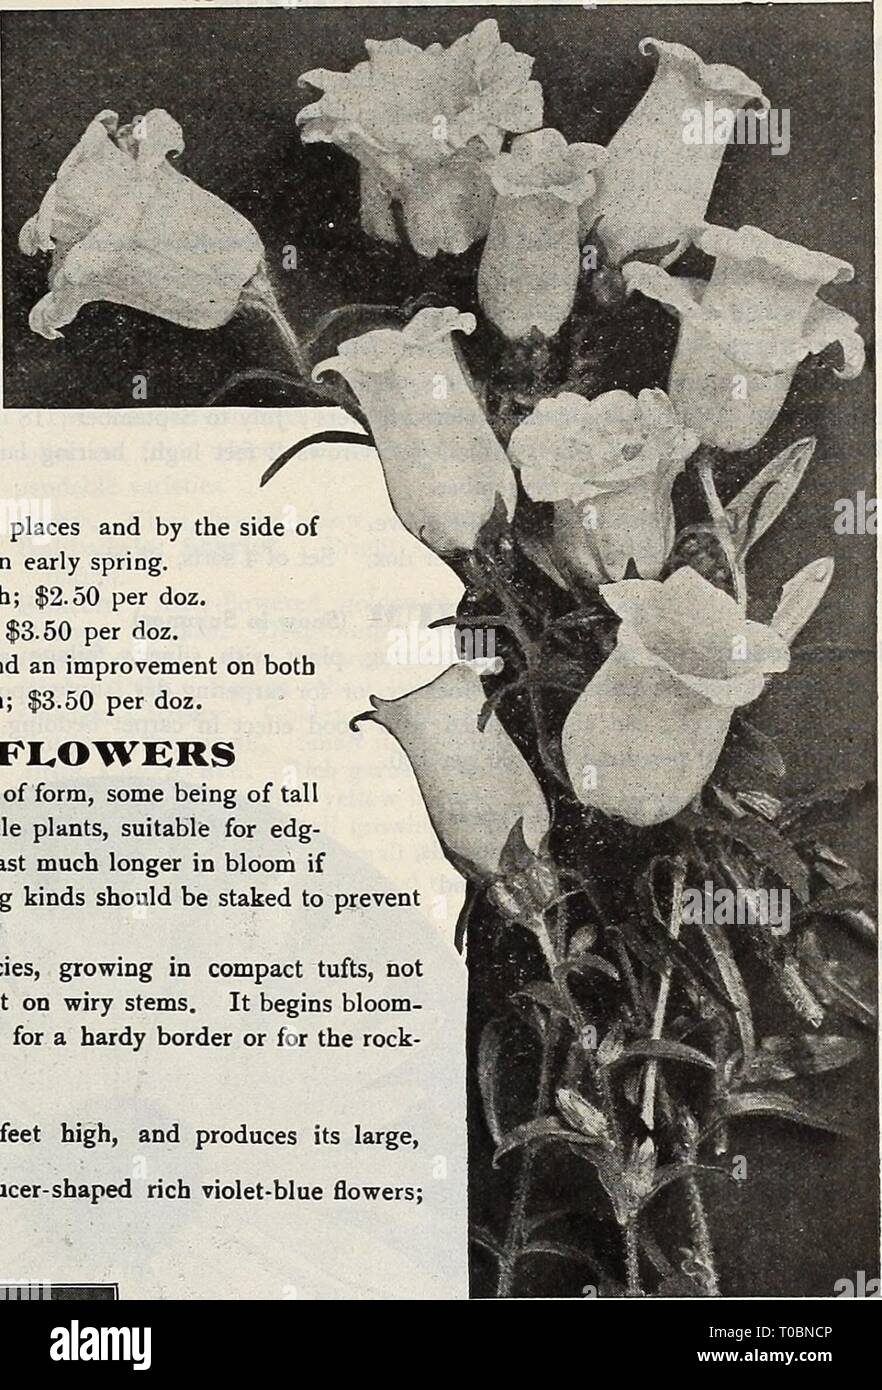 Dreer's garden book 1919 (1919) Dreer's garden book 1919 dreersgardenbook1919henr Year: 1919  BOLTOMIA Campanula Medium (Canterbury Bells) Qrosseki. Produces its dark-blue flowers all summer; 2 feet. Lactiflora Coerulea. Pale blue flowers during July and August; 2i feet. Latifolia Macanthra. Large purplish-blue flowers; May and June; 3 feet. Medium ( Canterbury Bells). We can supply this popu- lar old-fashioned favorite in a choice strain of mixed colors. Punctata. Large nodding bell-shaped flowers, white spotted purplish-rose. Pyramidalis [Chimney Bell-flower). The most conspicu- ous of all C Stock Photo